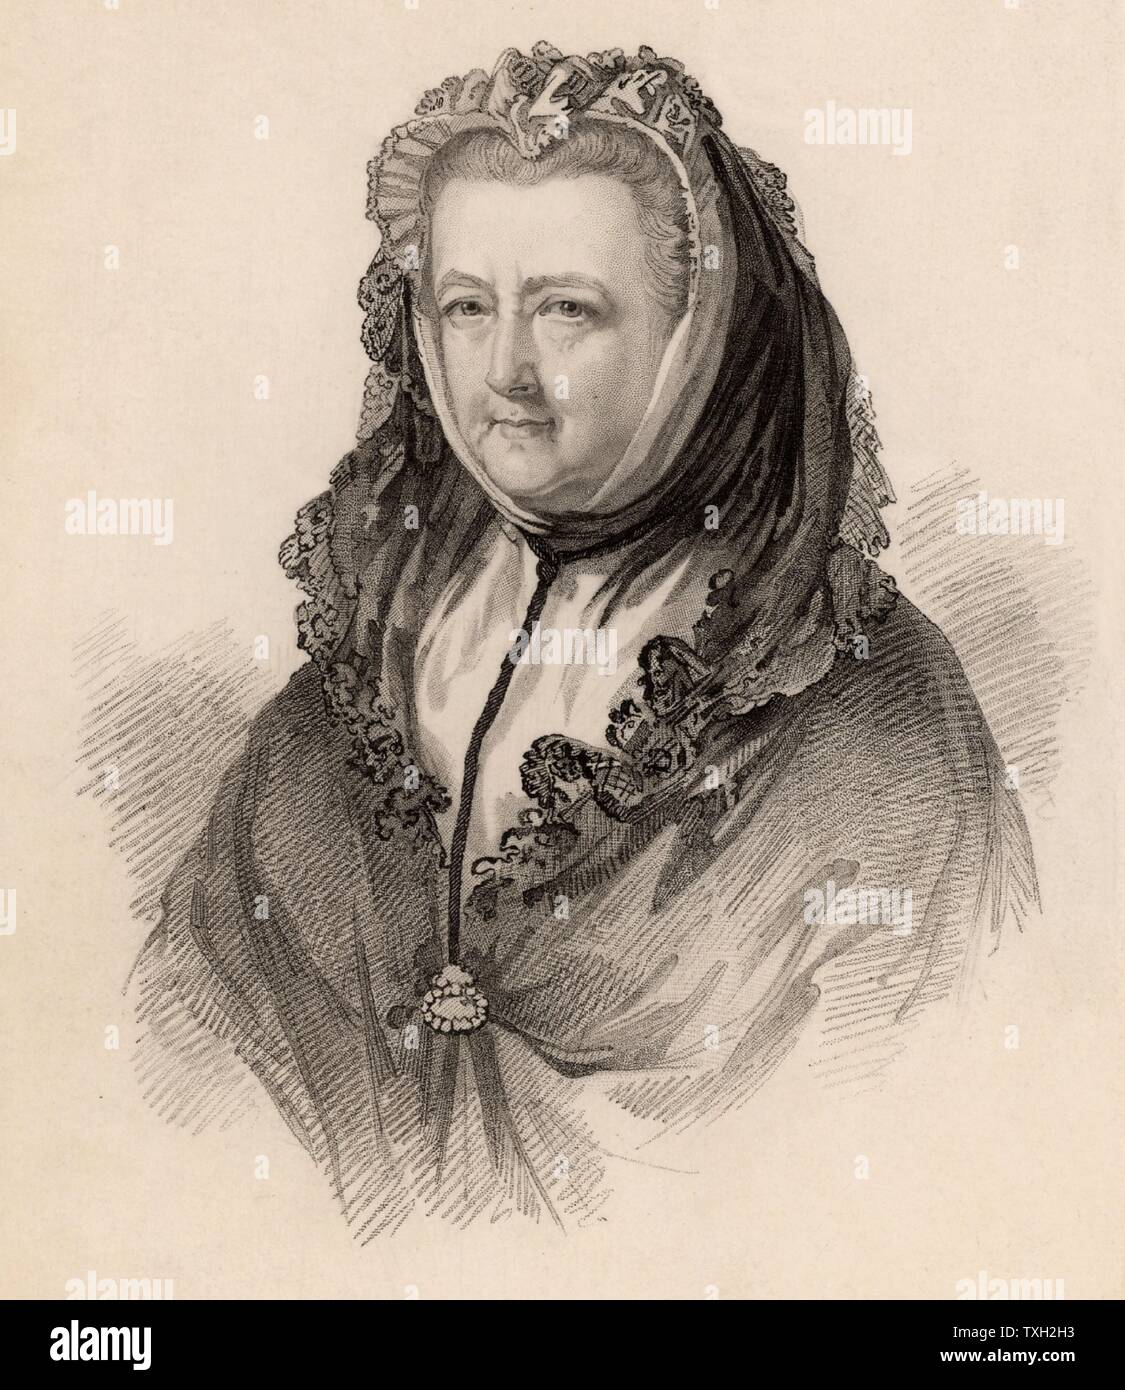 Mary Delany (born Granville 1700-1788) Englishwoman of artistic and literary tastes.  In 1743 she married Patrick Delany, an Irish churchman and friend of Dean Jonathan Swift. She created exquisite paper 'mosaiks' (collages), many of which are now in the British Museum.    Engraving from 'Diary and Letters of Madame D'Arblay' by Fanny Burney (London, 1843). Stock Photo